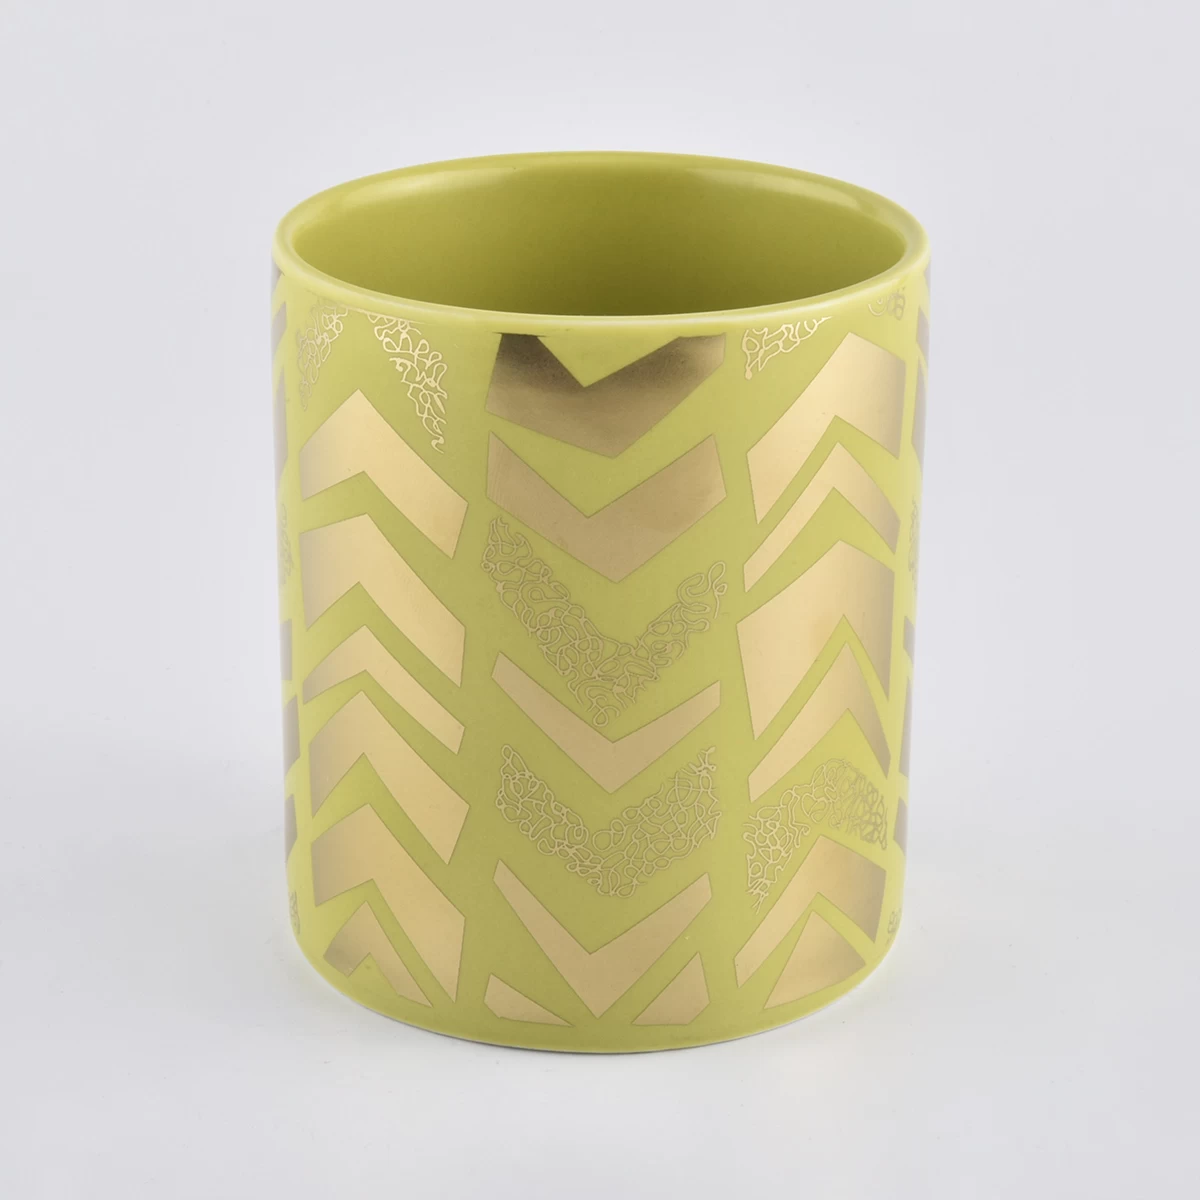 Custom Gold Decal On Ceramic Candle Vessels